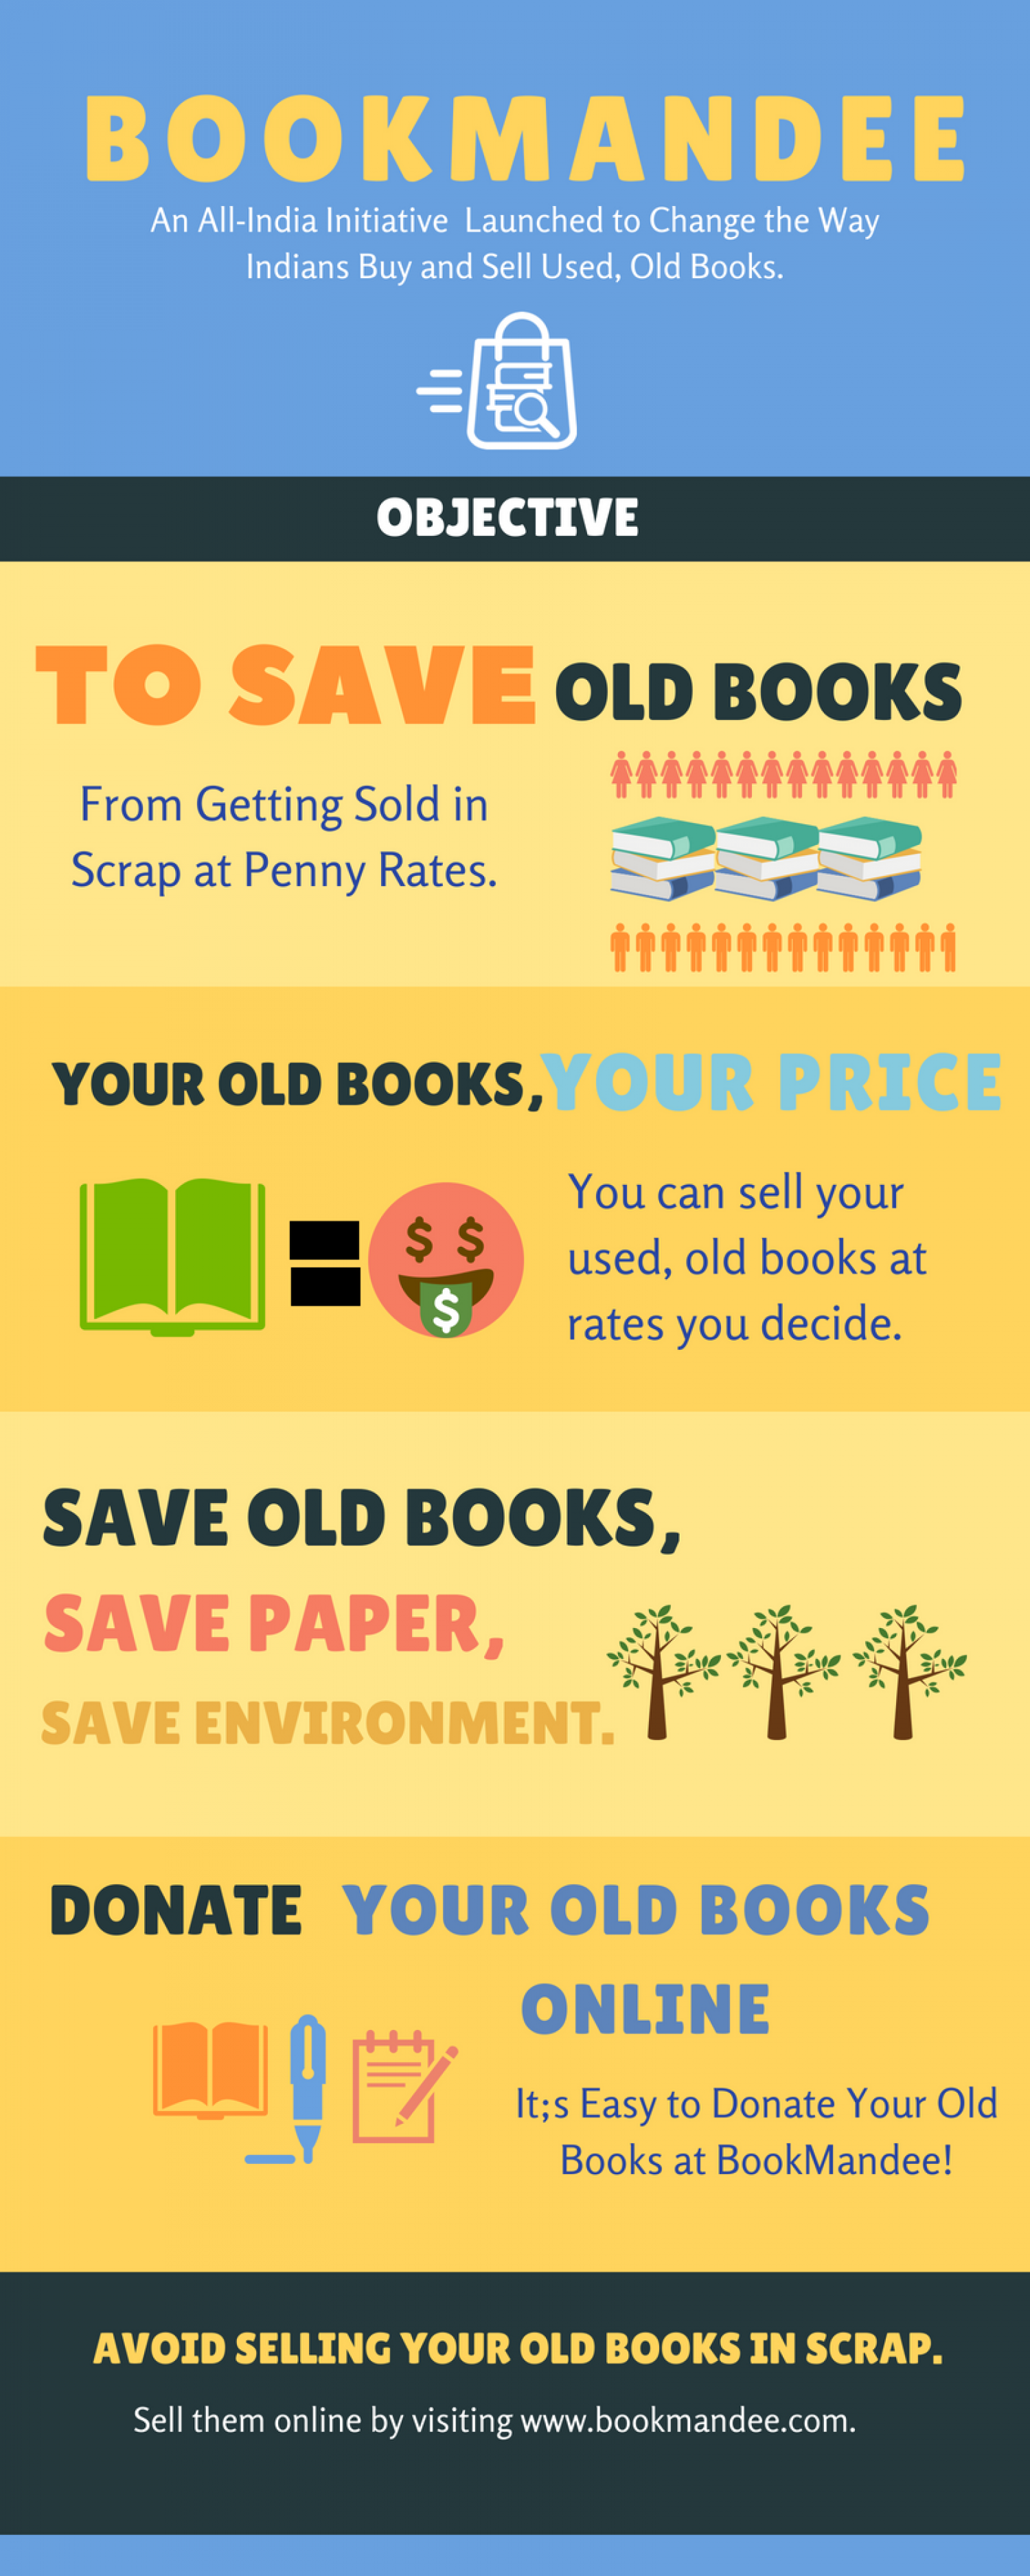 BookMandee - to Sell Used, Old Books in India Infographic